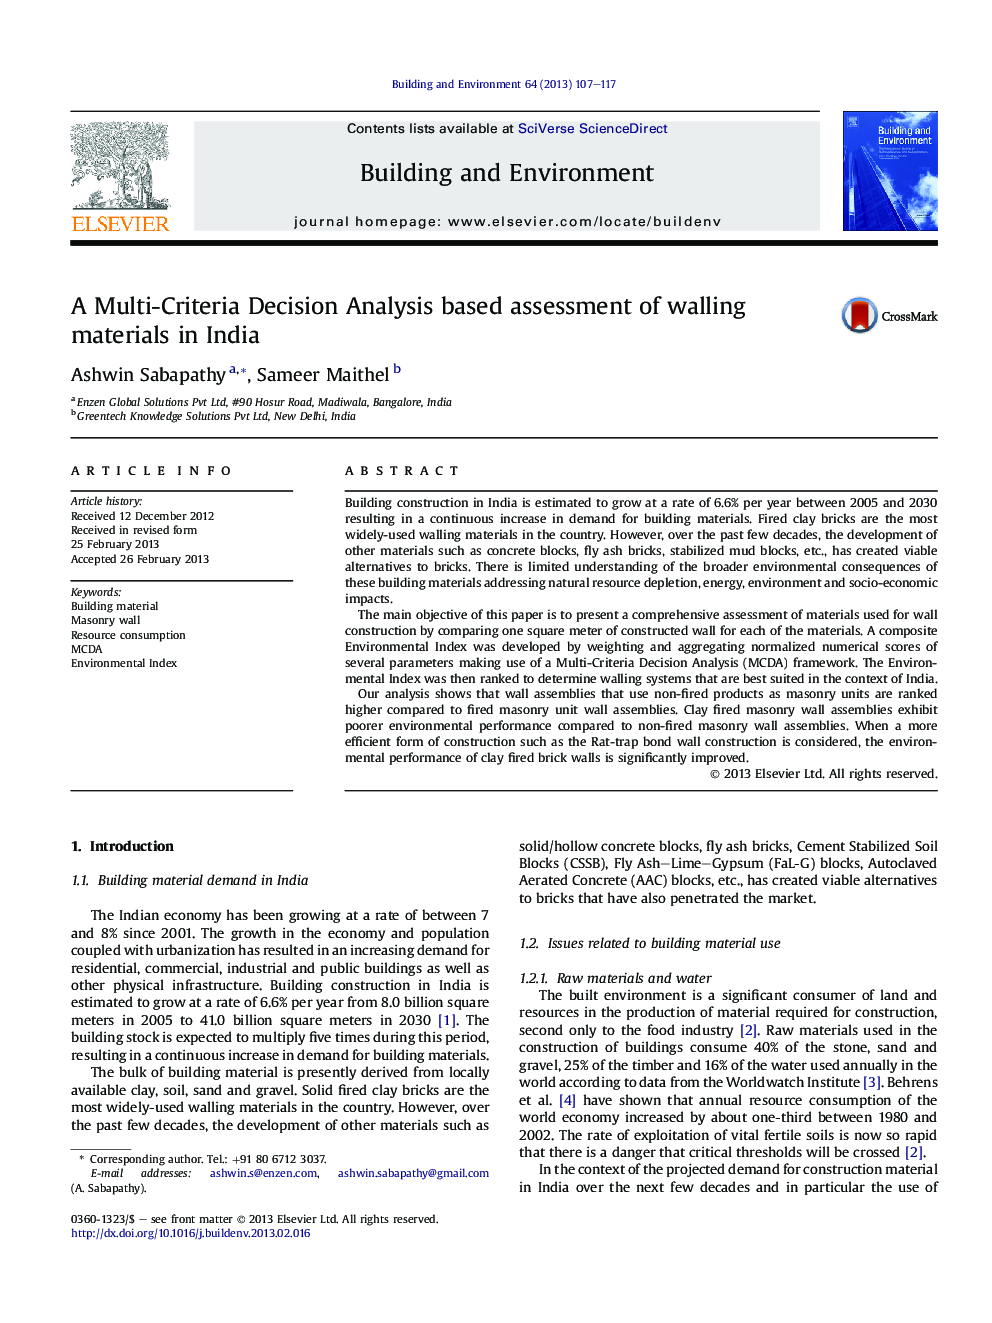 A Multi-Criteria Decision Analysis based assessment of walling materials in India